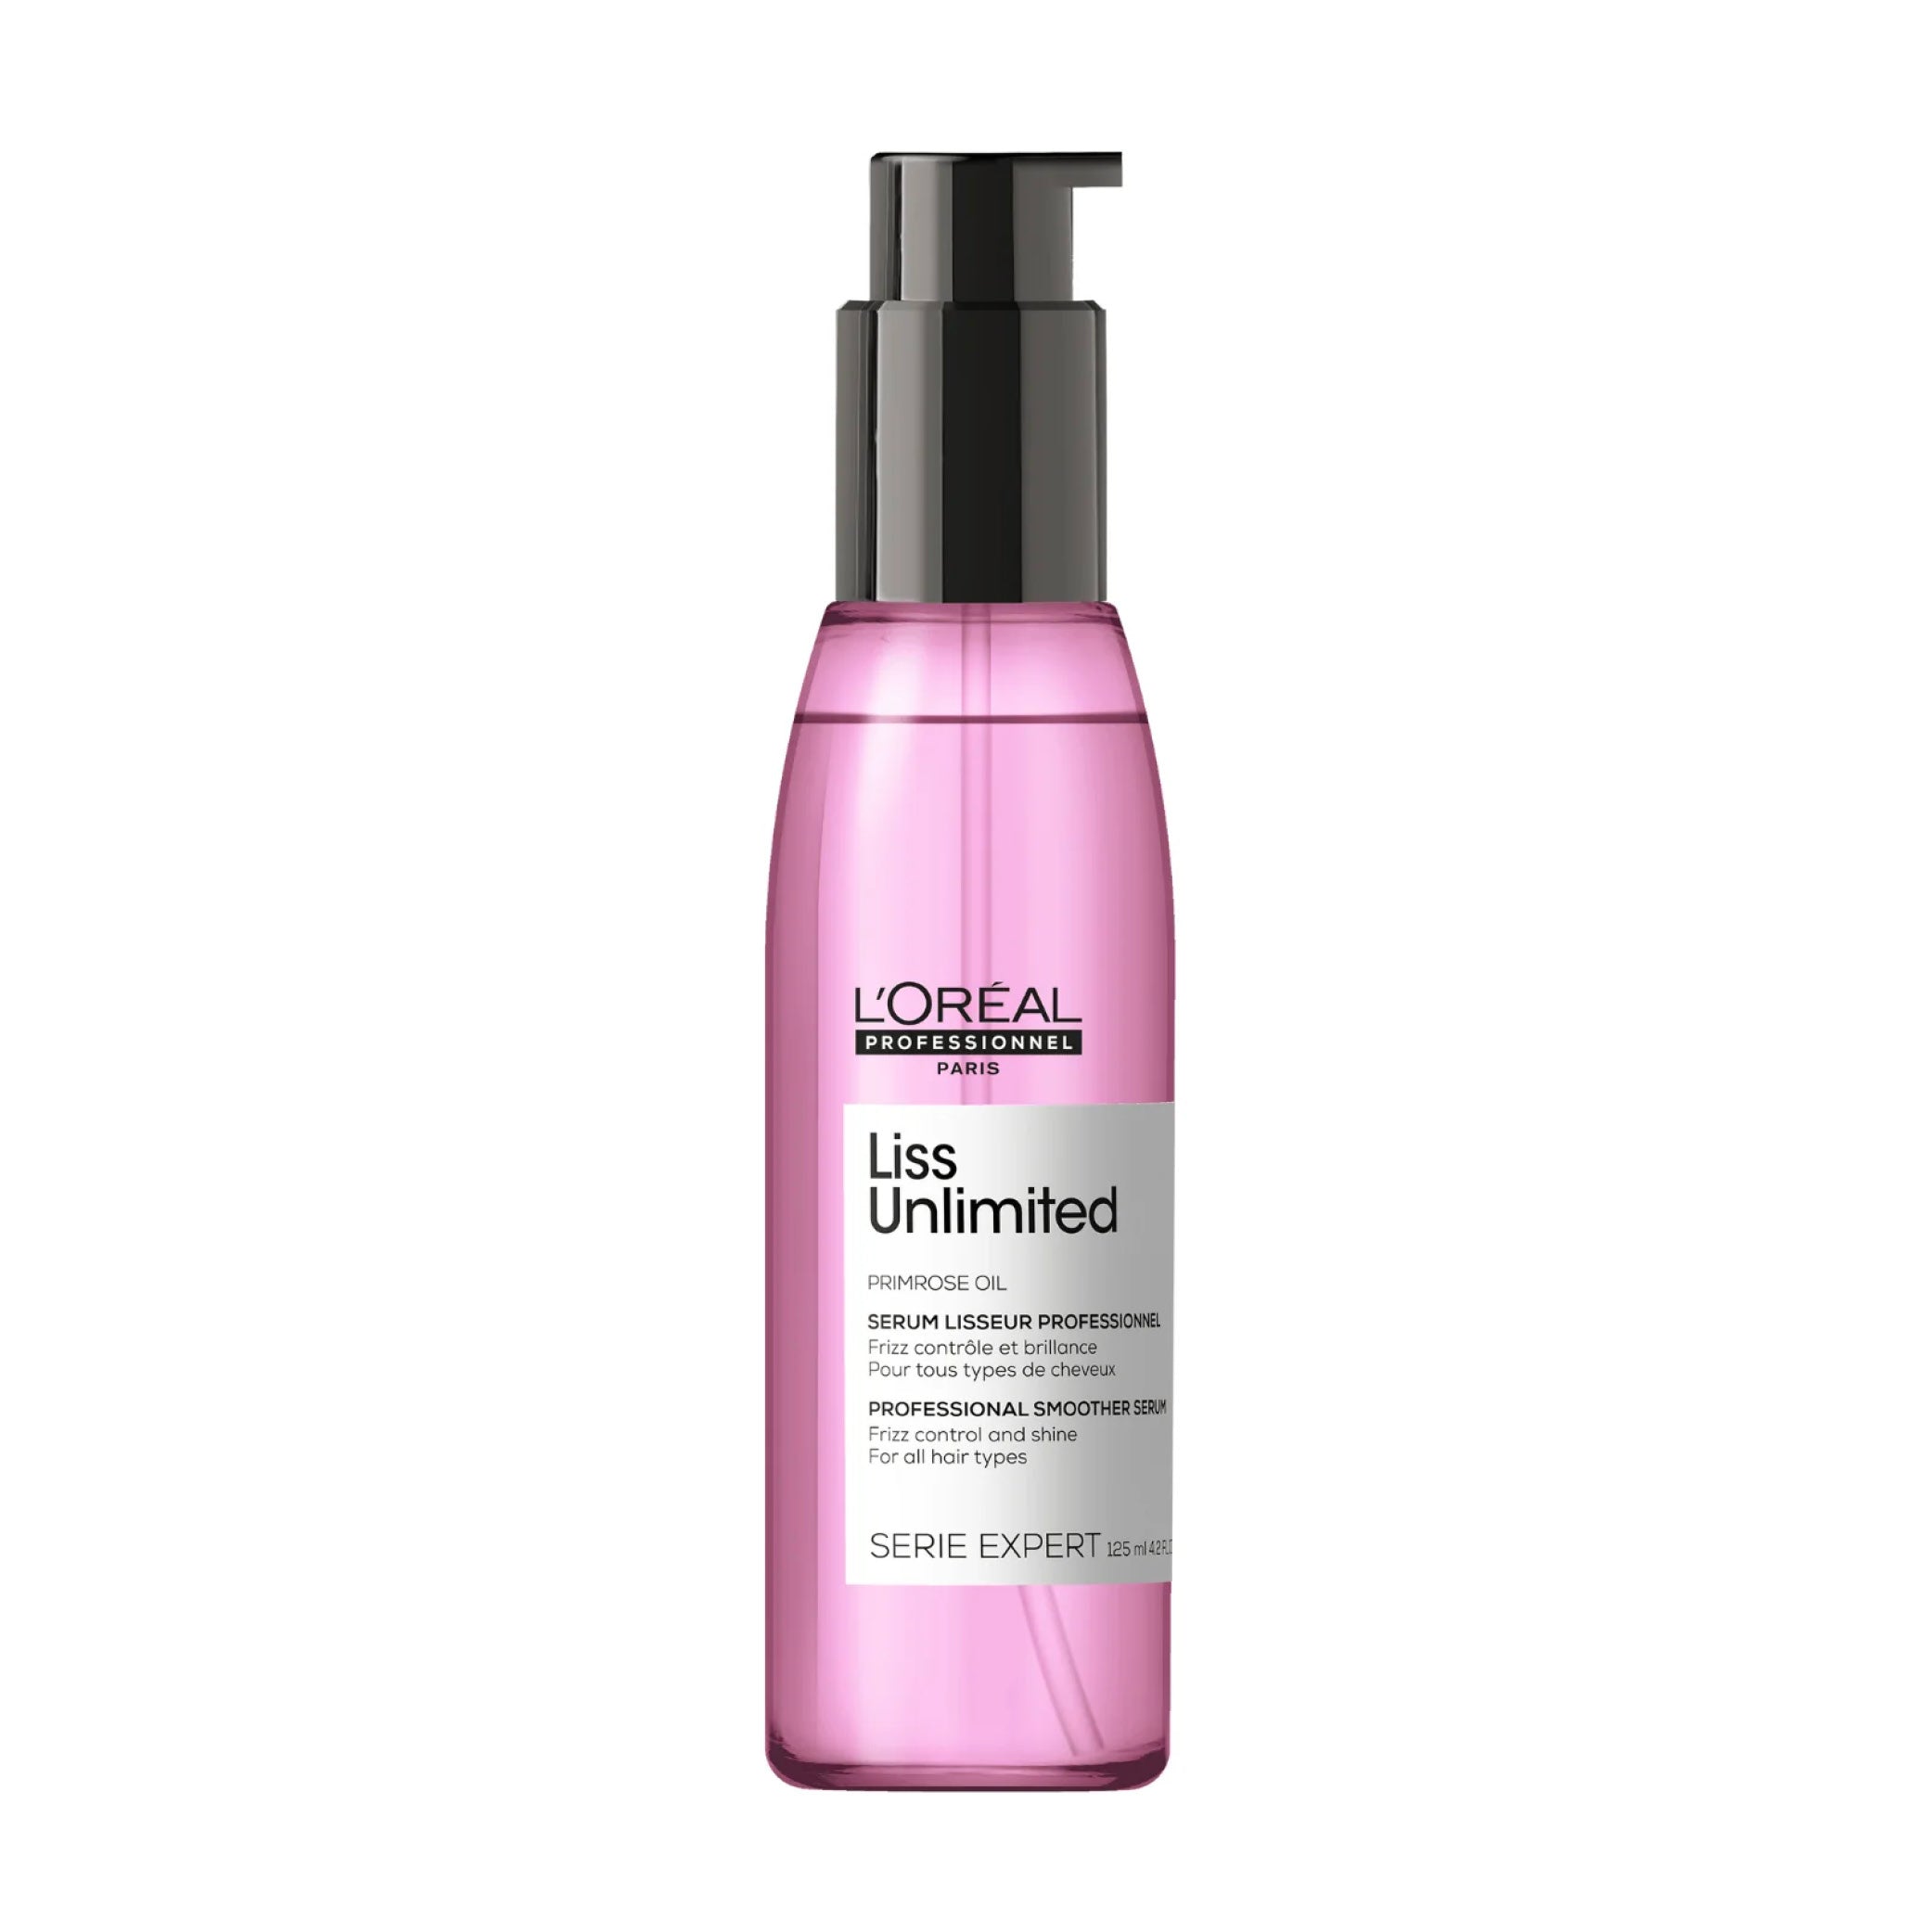 Liss Unlimited Perfecting Oil